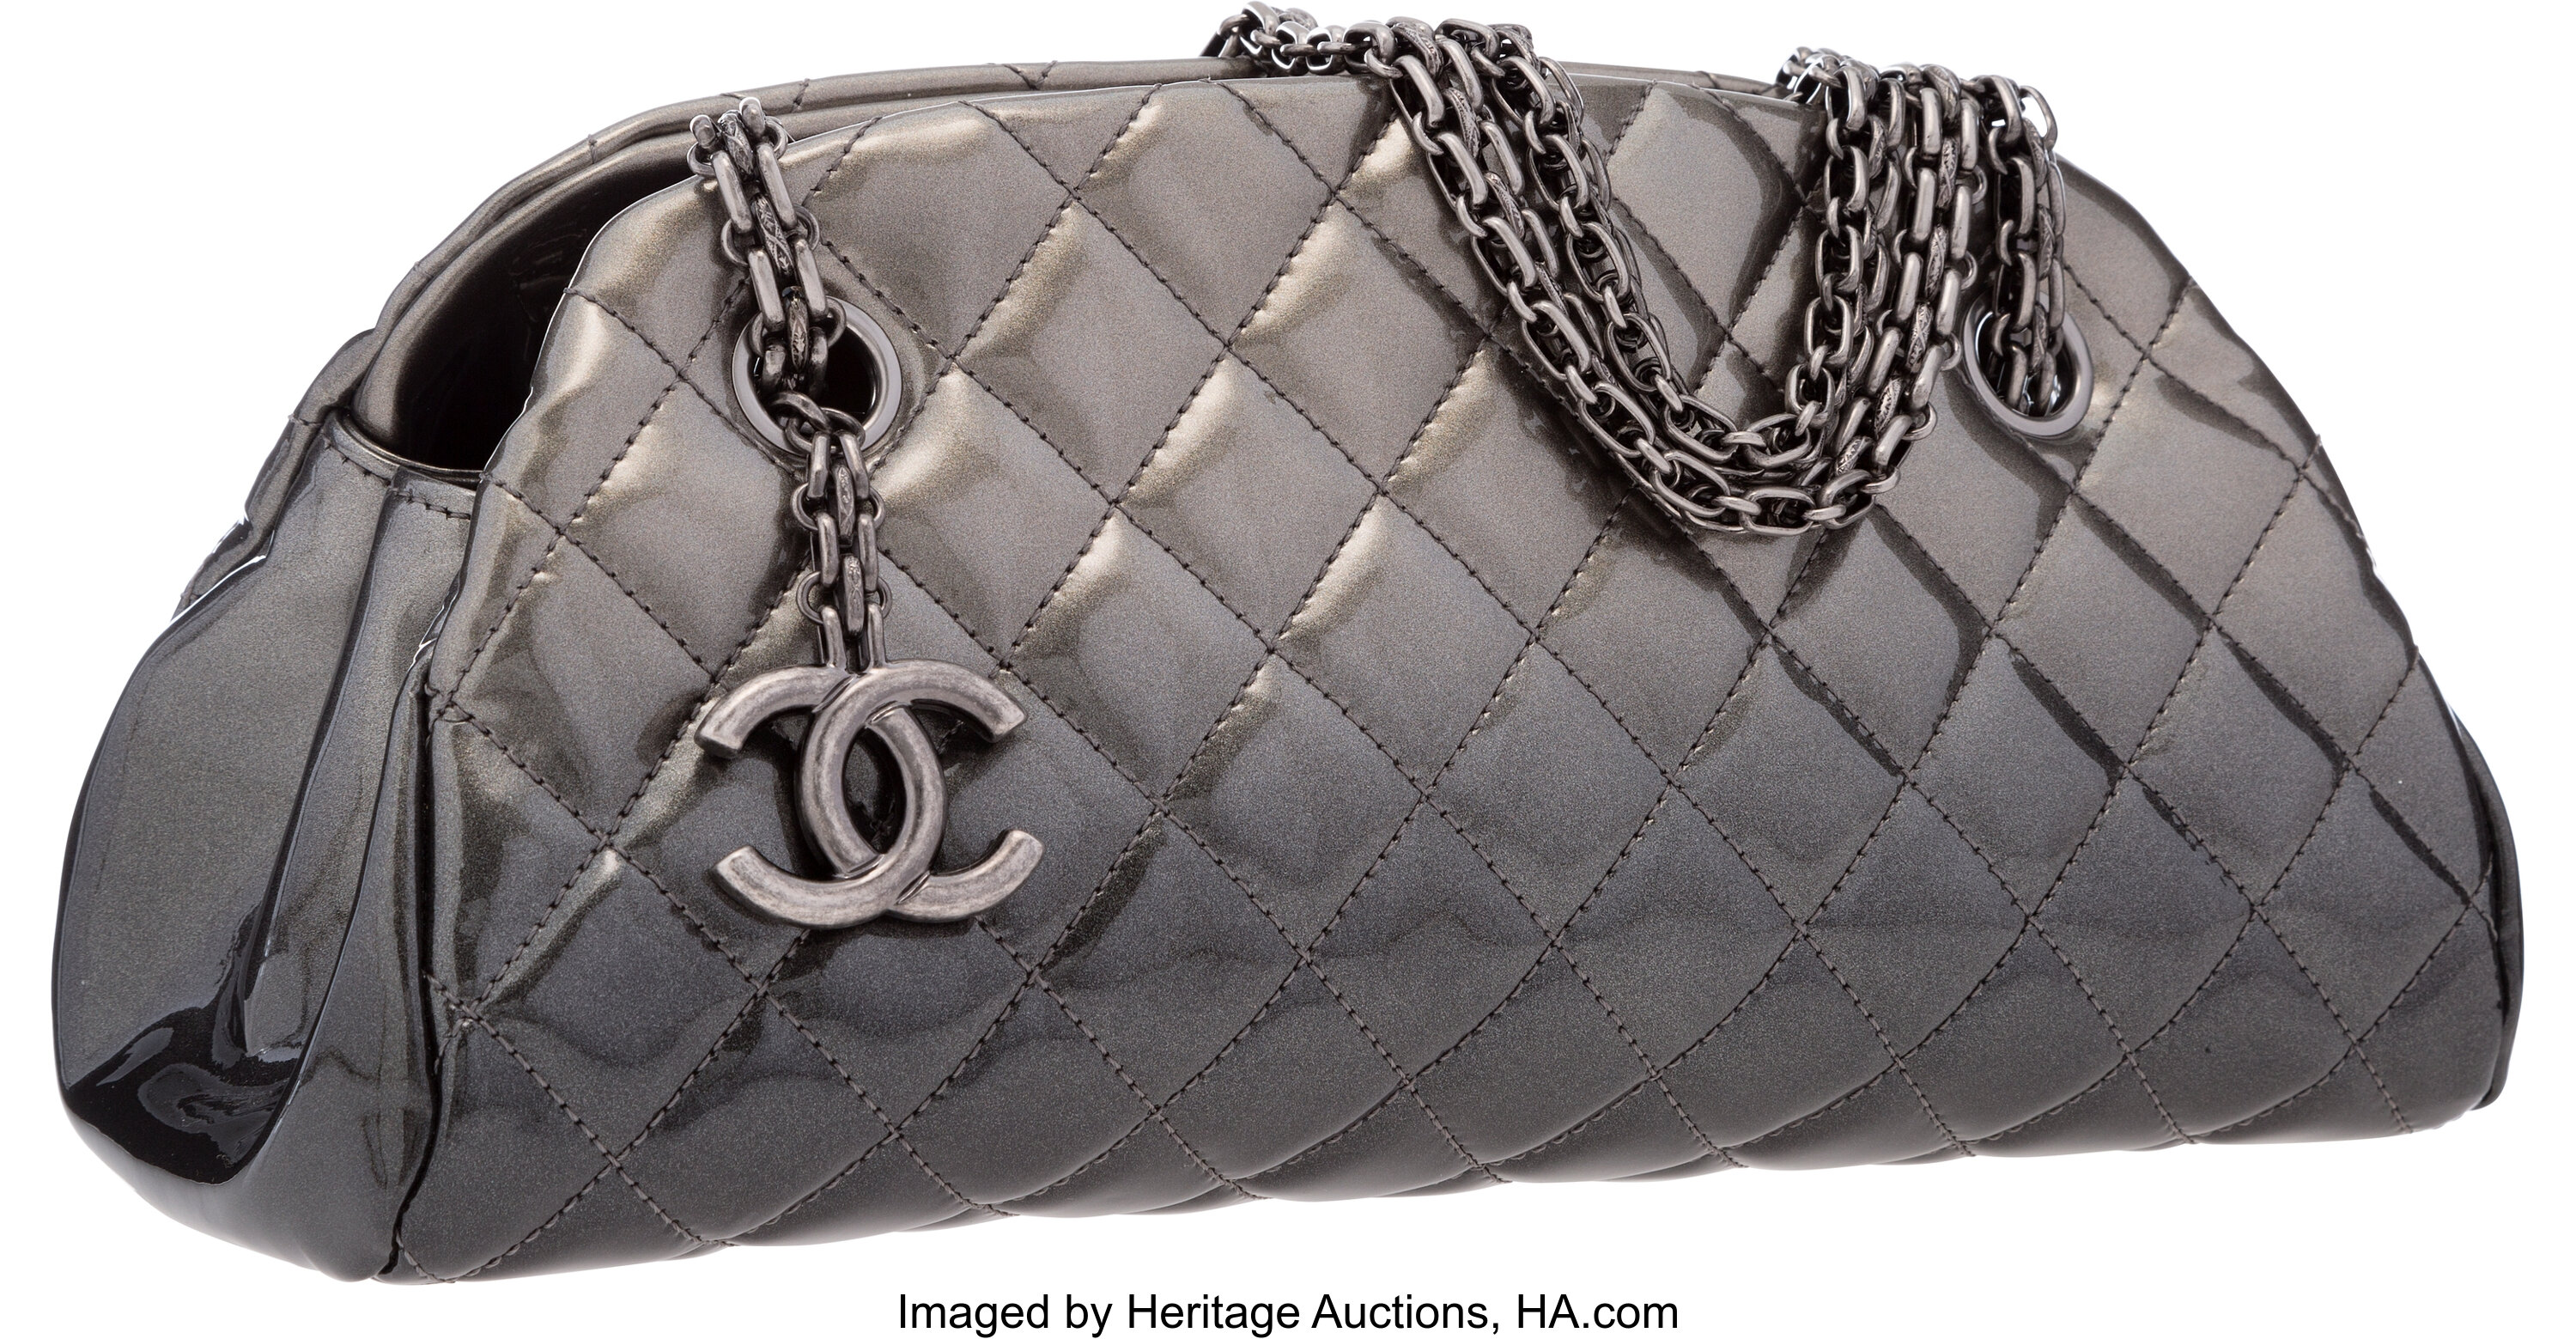 Chanel Ombre Gray Patent Leather Bowling Bag with Gunmetal